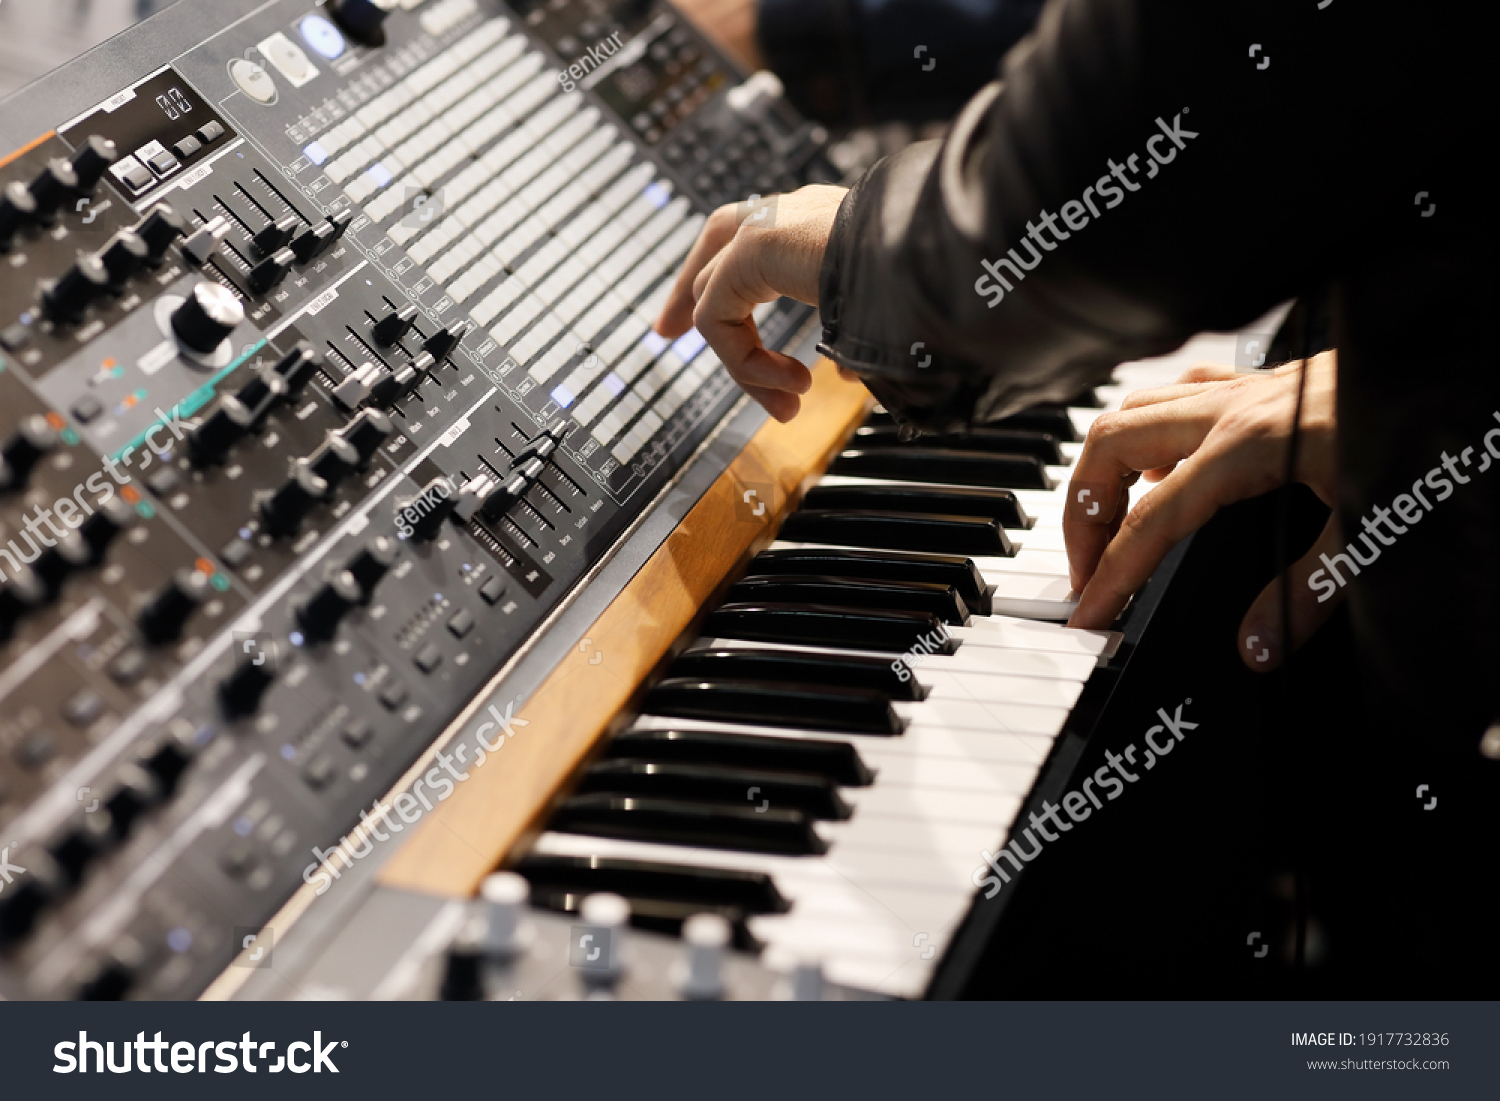 Playing music on the keyboard of a modern analog synthesizer. Selective focus. #1917732836